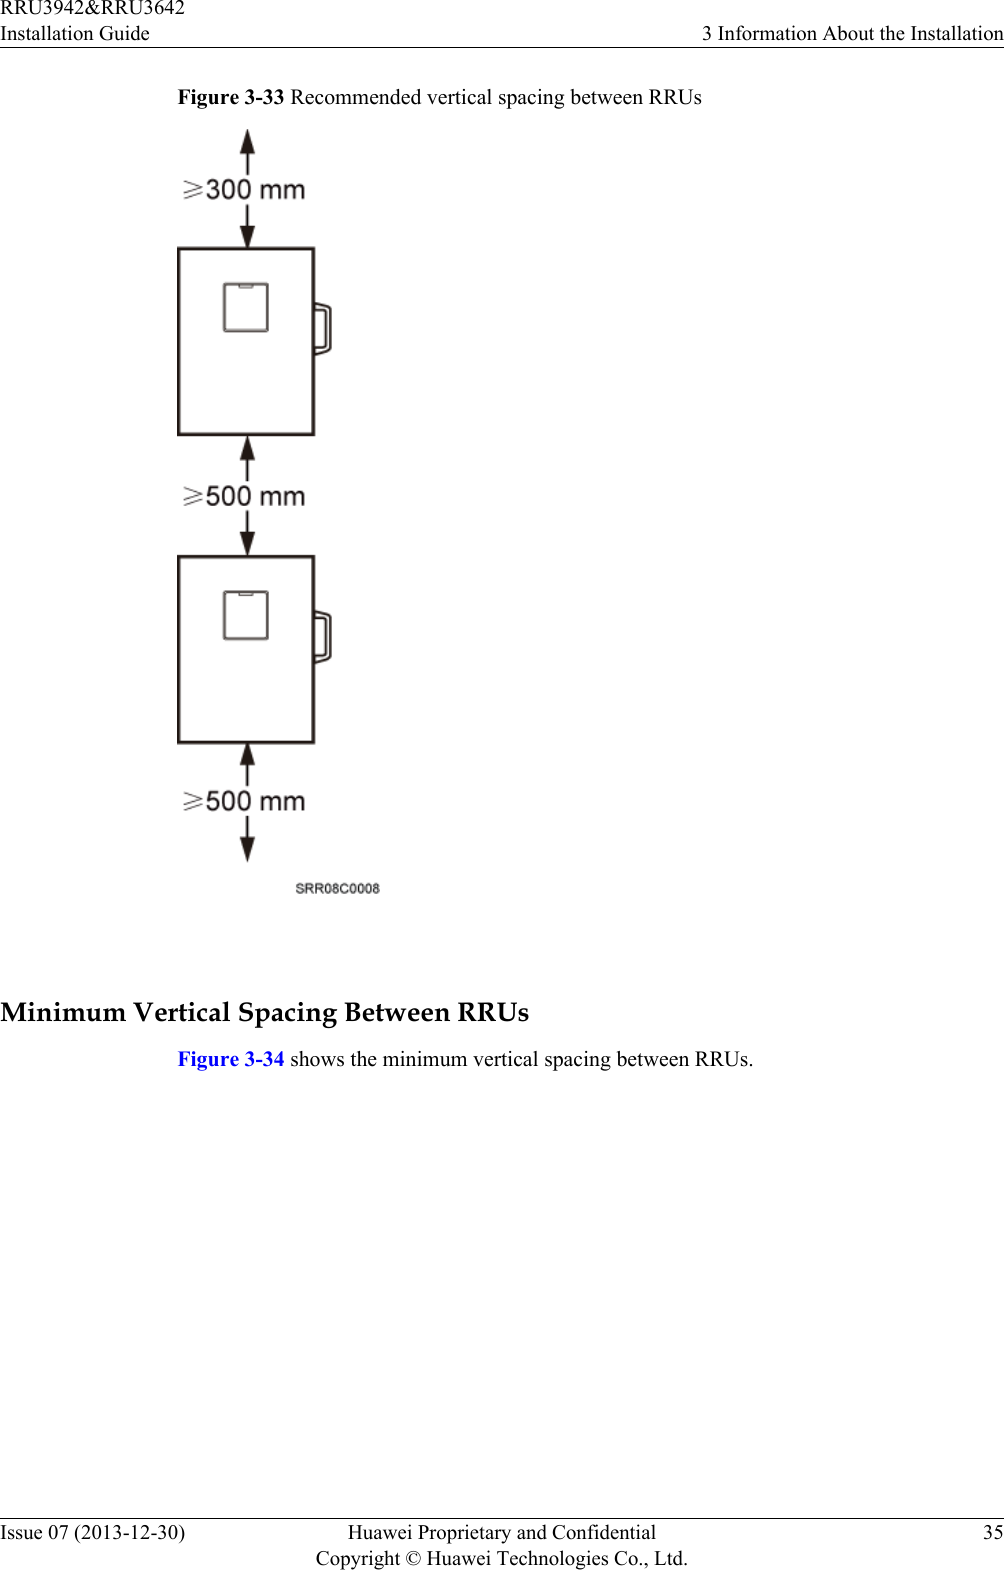 Figure 3-33 Recommended vertical spacing between RRUs Minimum Vertical Spacing Between RRUsFigure 3-34 shows the minimum vertical spacing between RRUs.RRU3942&amp;RRU3642Installation Guide 3 Information About the InstallationIssue 07 (2013-12-30) Huawei Proprietary and ConfidentialCopyright © Huawei Technologies Co., Ltd.35